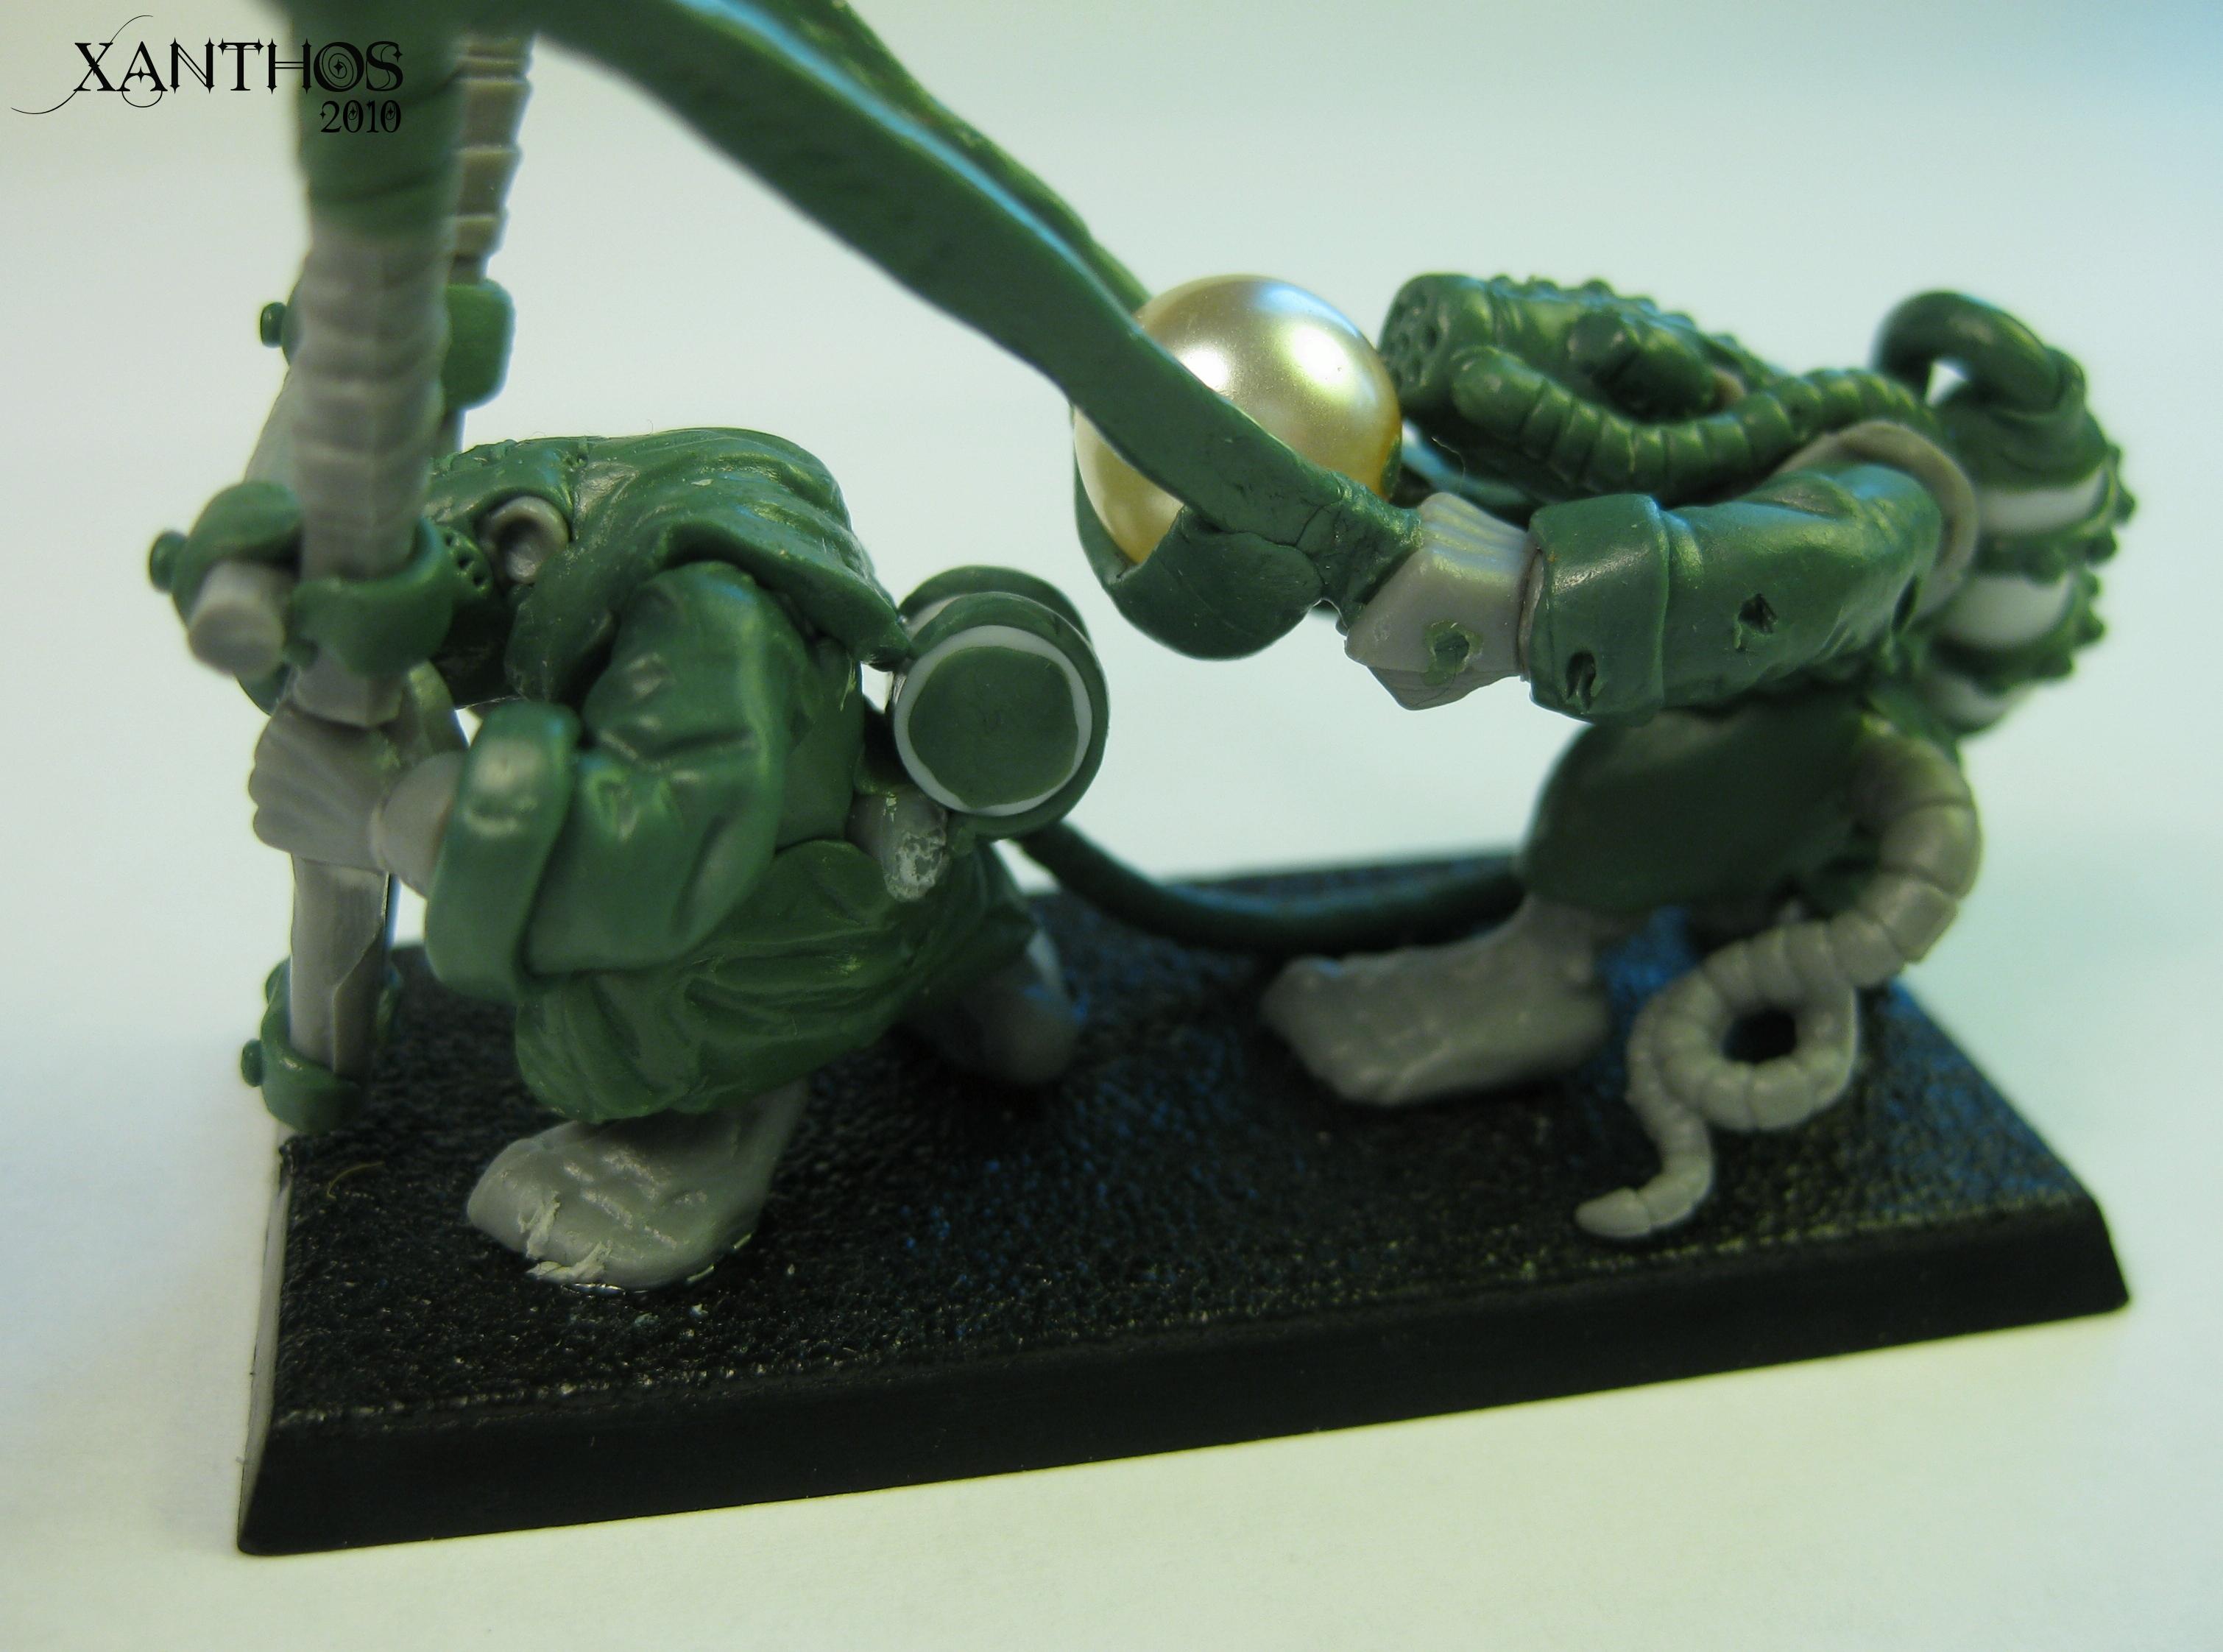 Skaven, And another shot, showing the team from the side